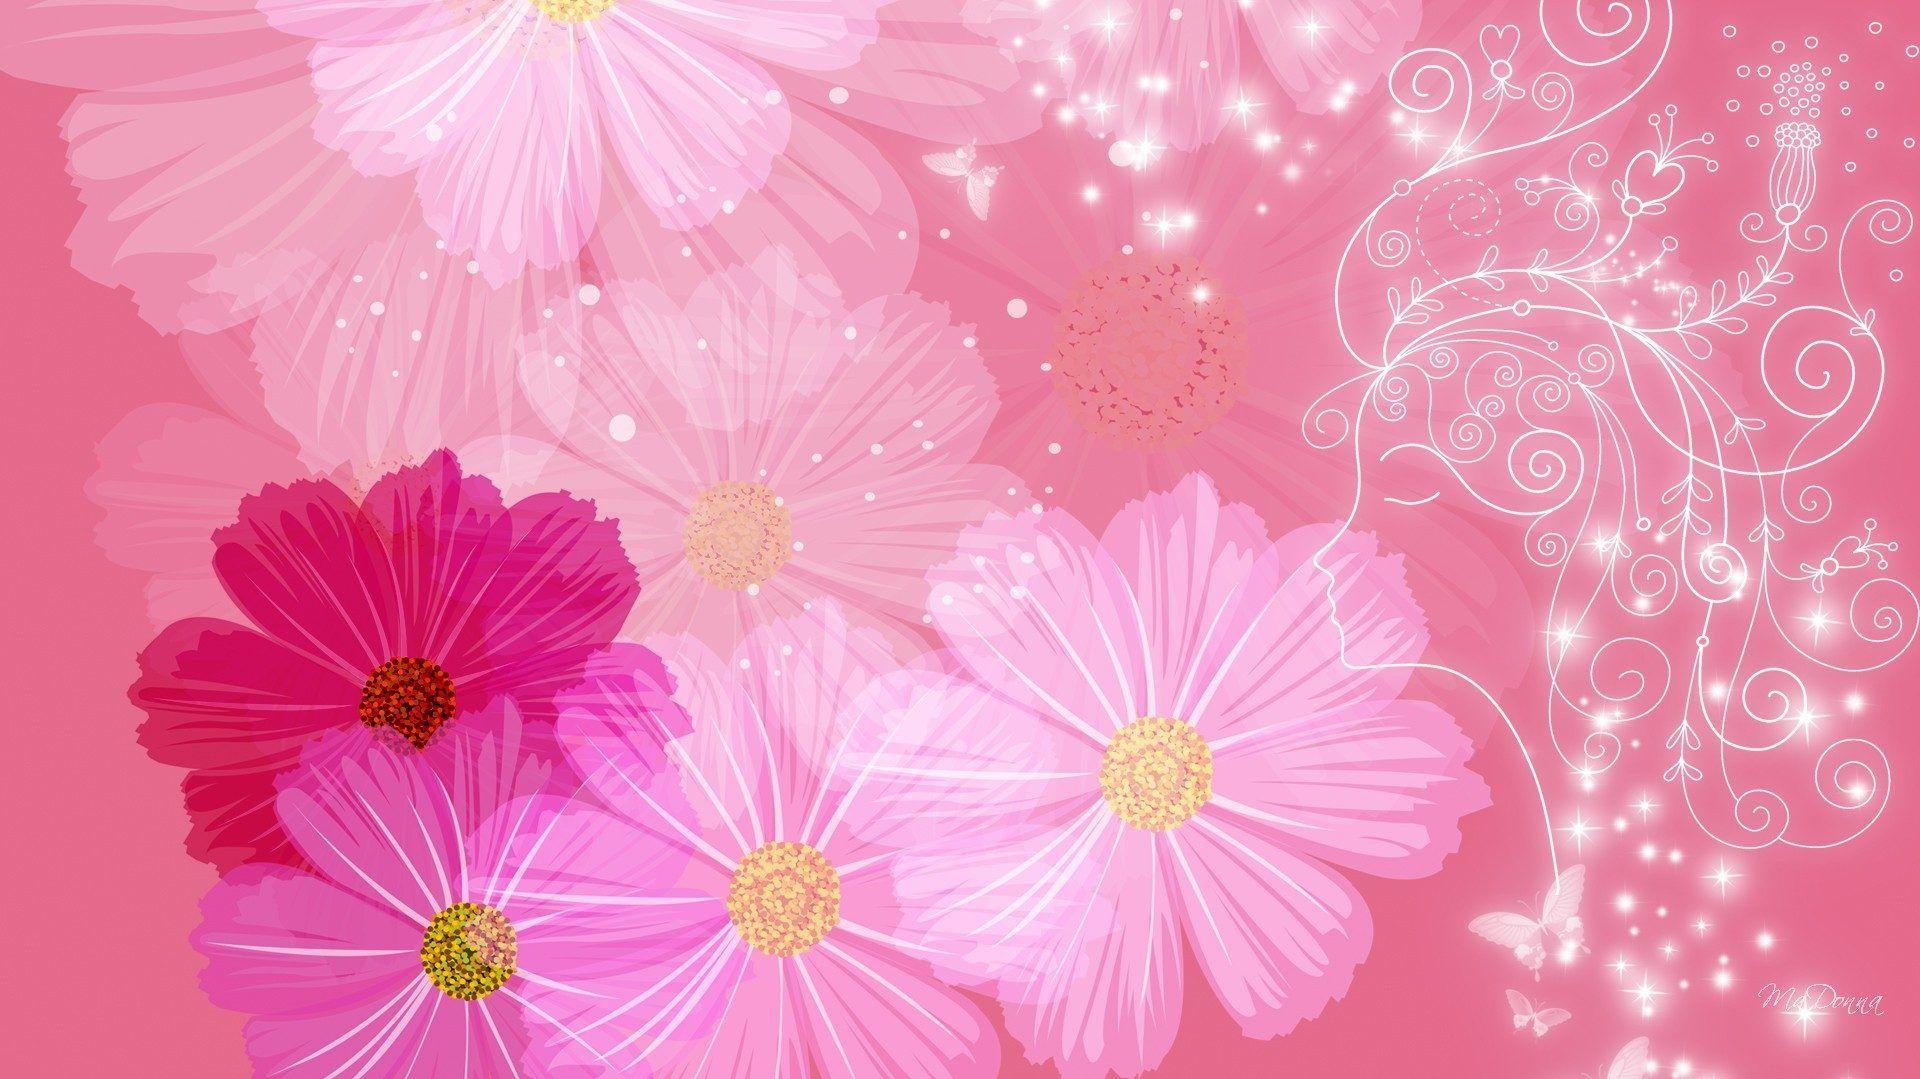 Flower: Pink Demand Flowers Sparkles Summer Shaded Scrolls Layers